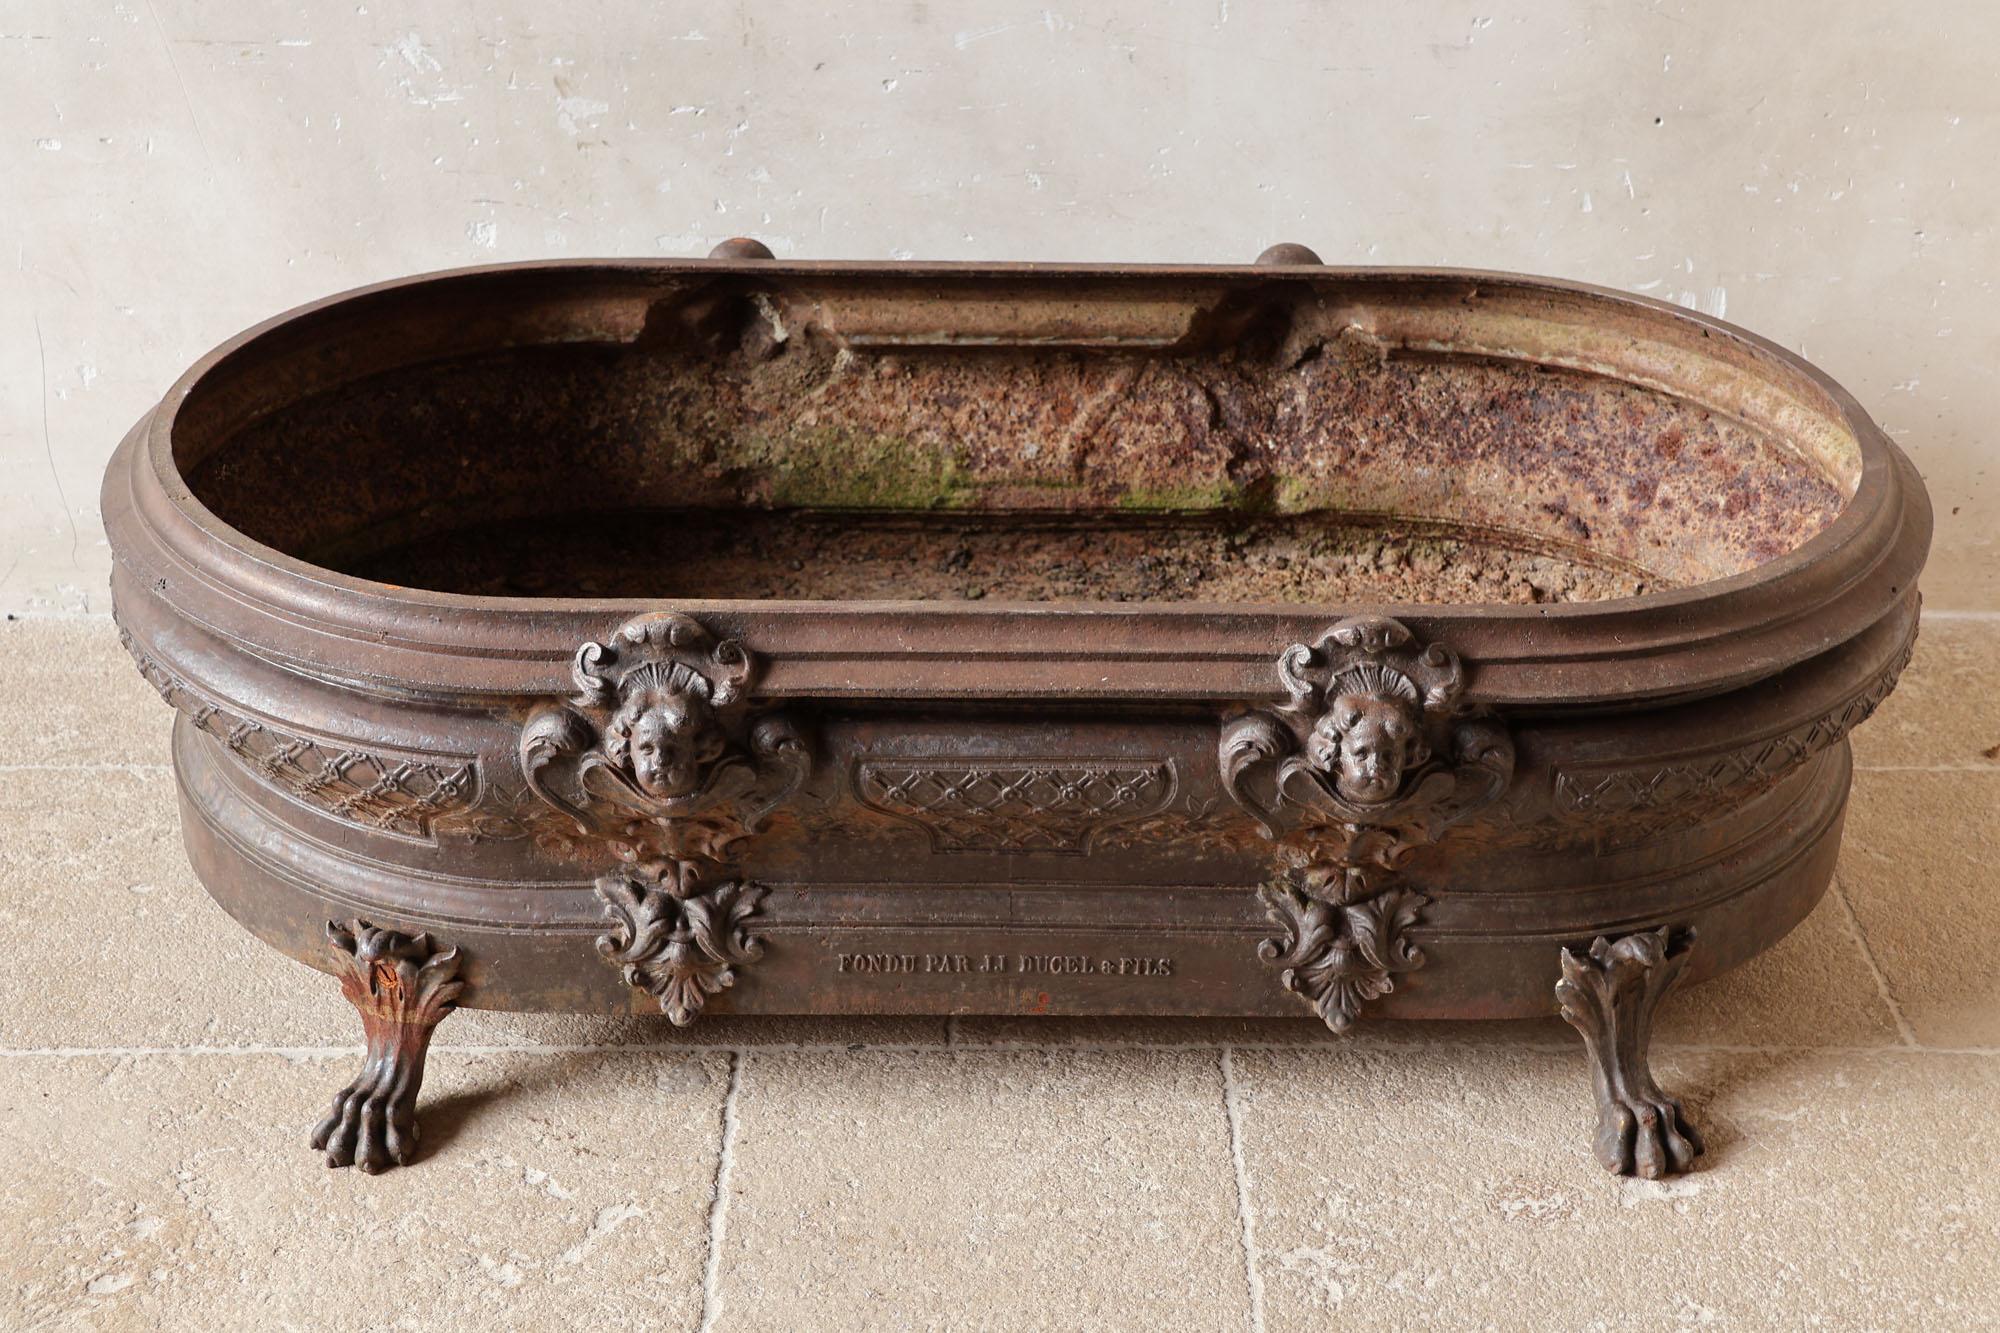 Large antique cast iron jardinière, richly decorated with angel heads and lion paws. This rare French planter was cast and stamped by J.J. Ducel Paris ± 1880. Beautiful for the entrance hall or on the terrace.

Dimensions: H 43 × L 138 × W 72 cm